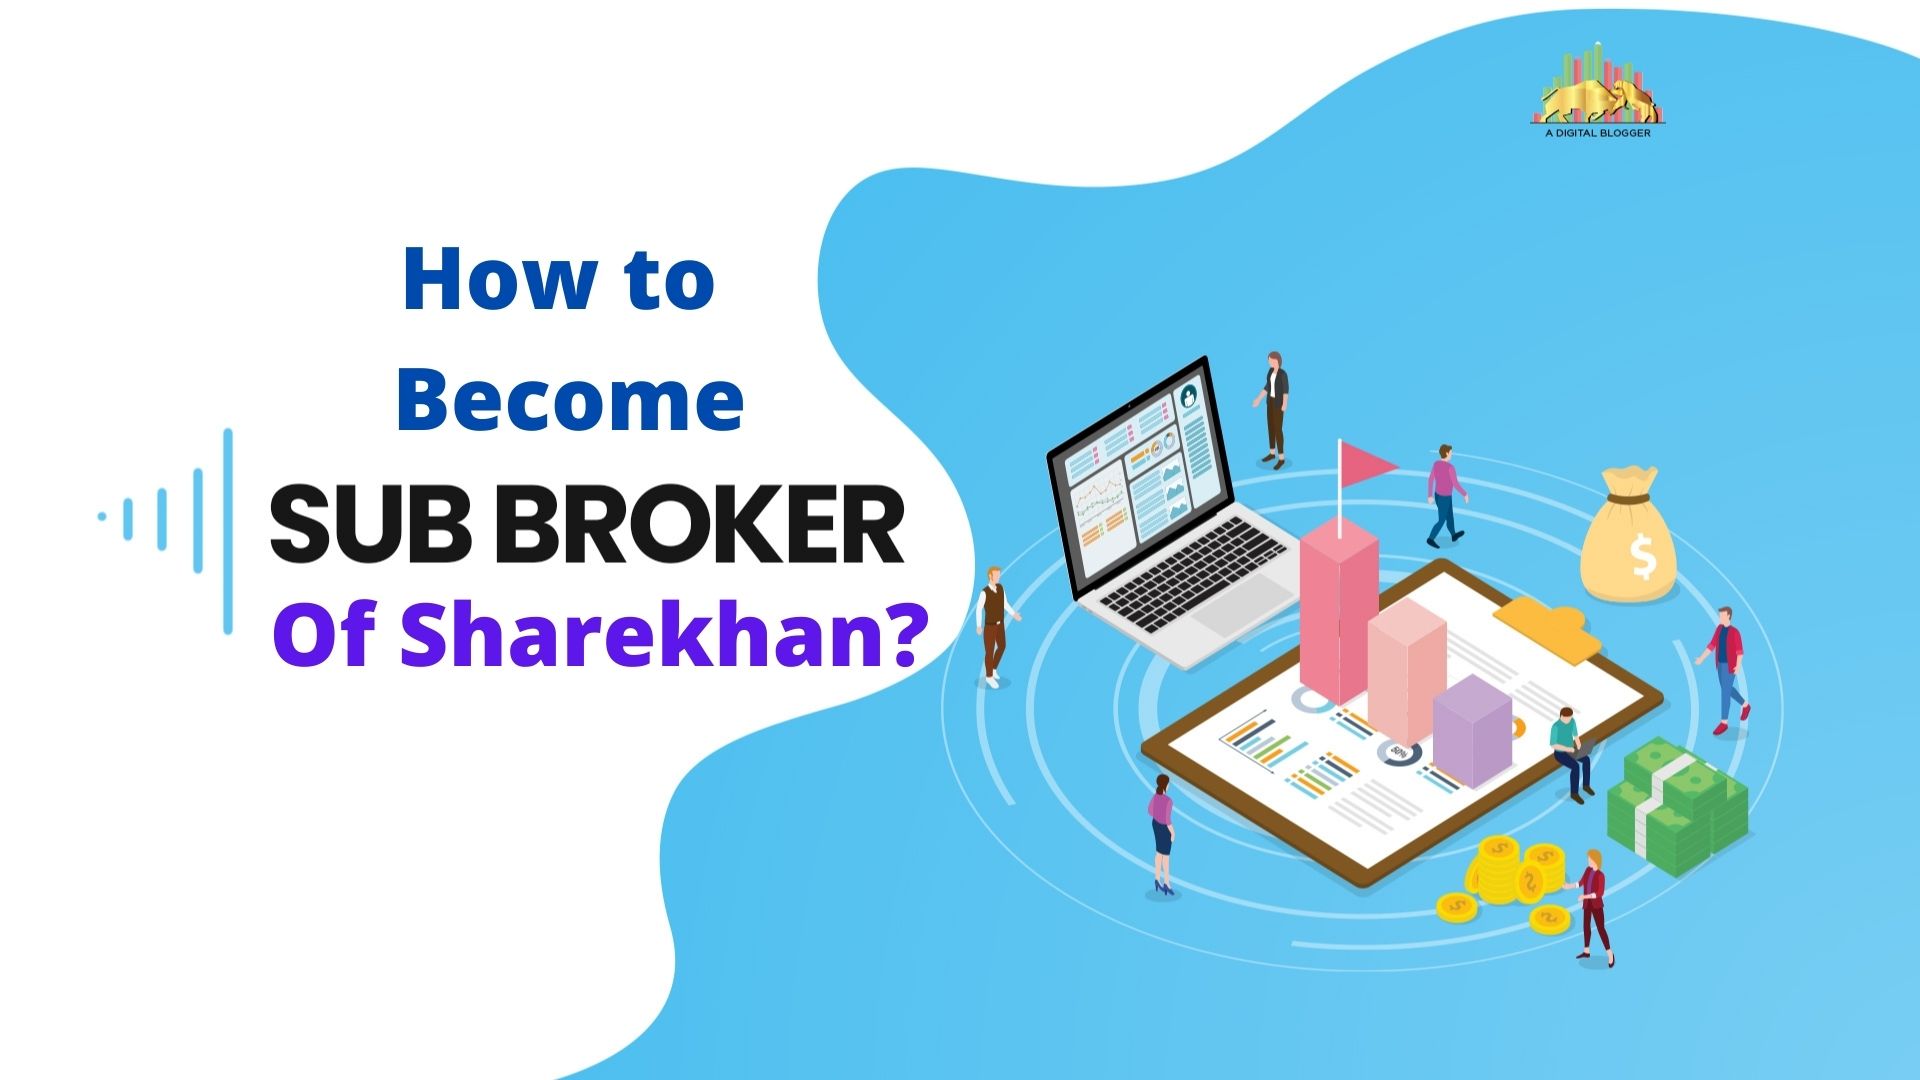 How to Become Know Everything in Detail About Sub Broker of Sharekhan